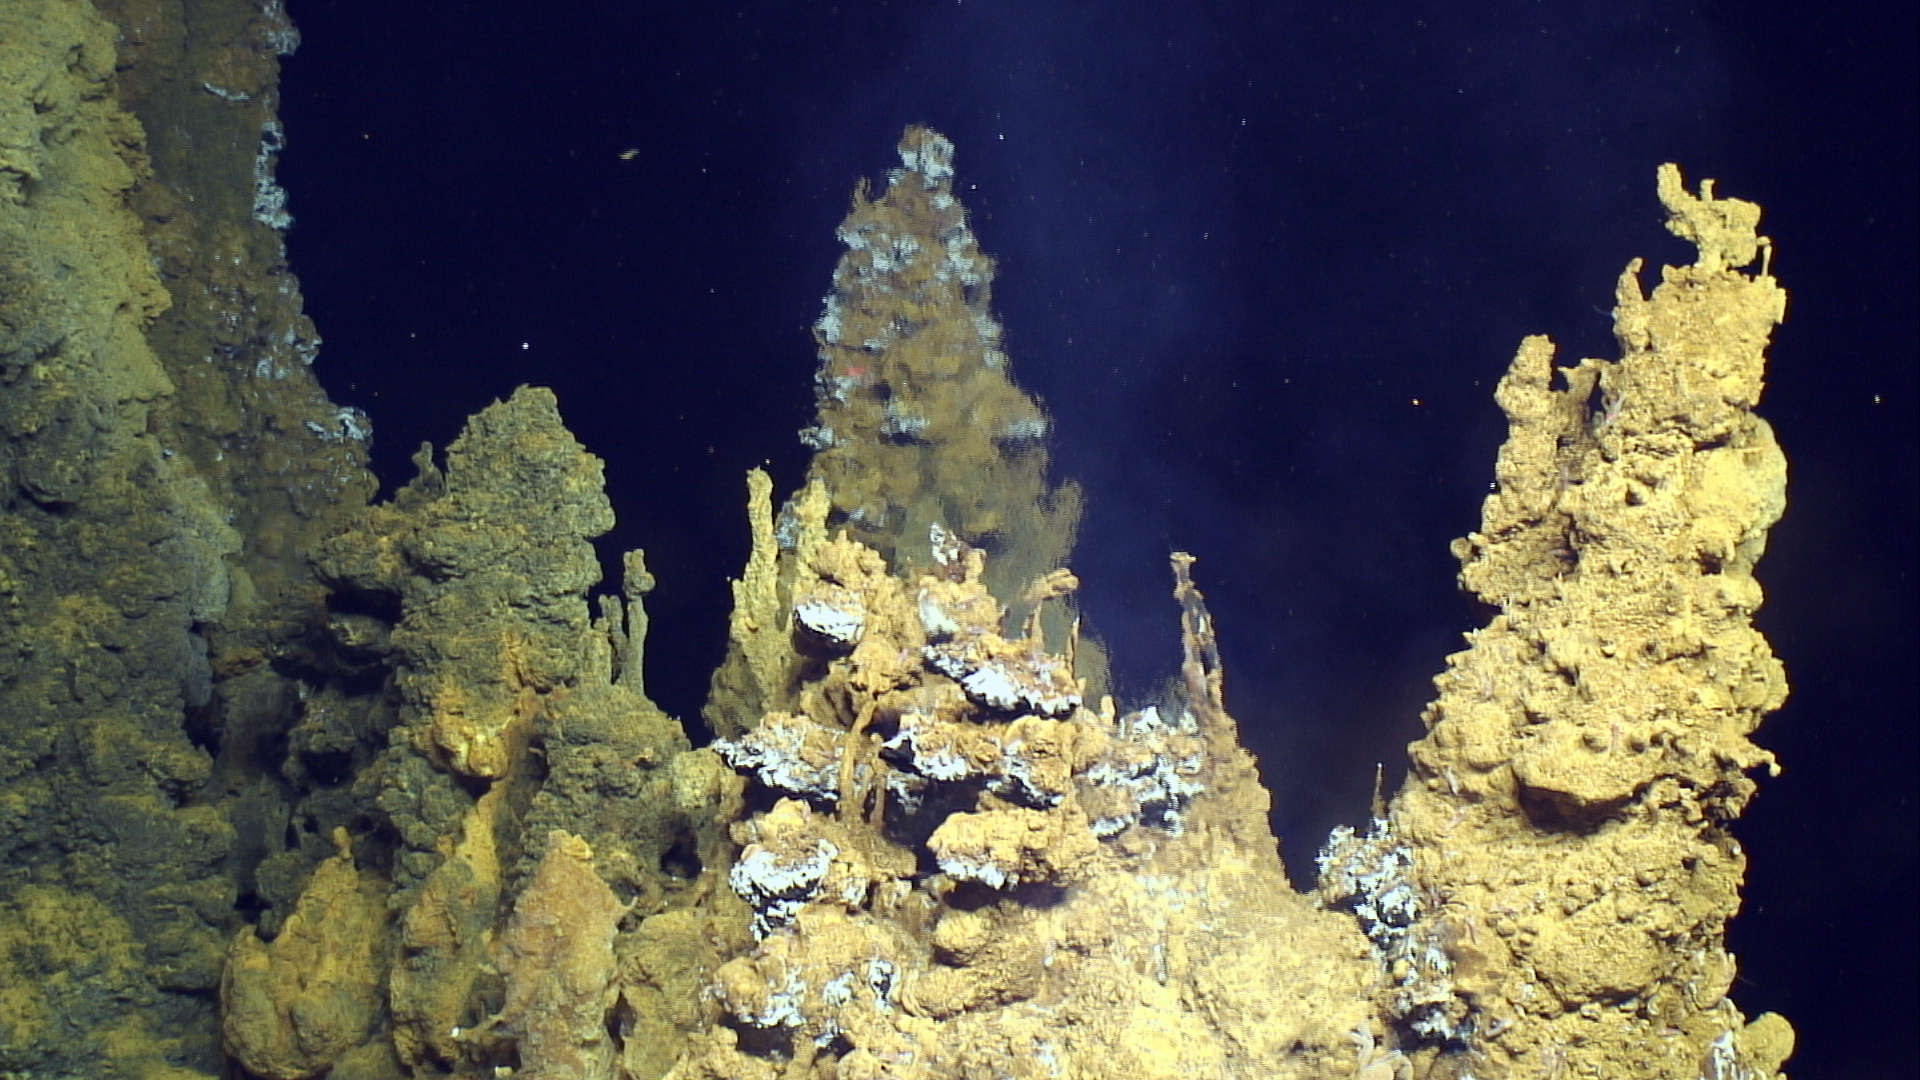 Hydrothermal vents like these are targeted for deep-sea mining.